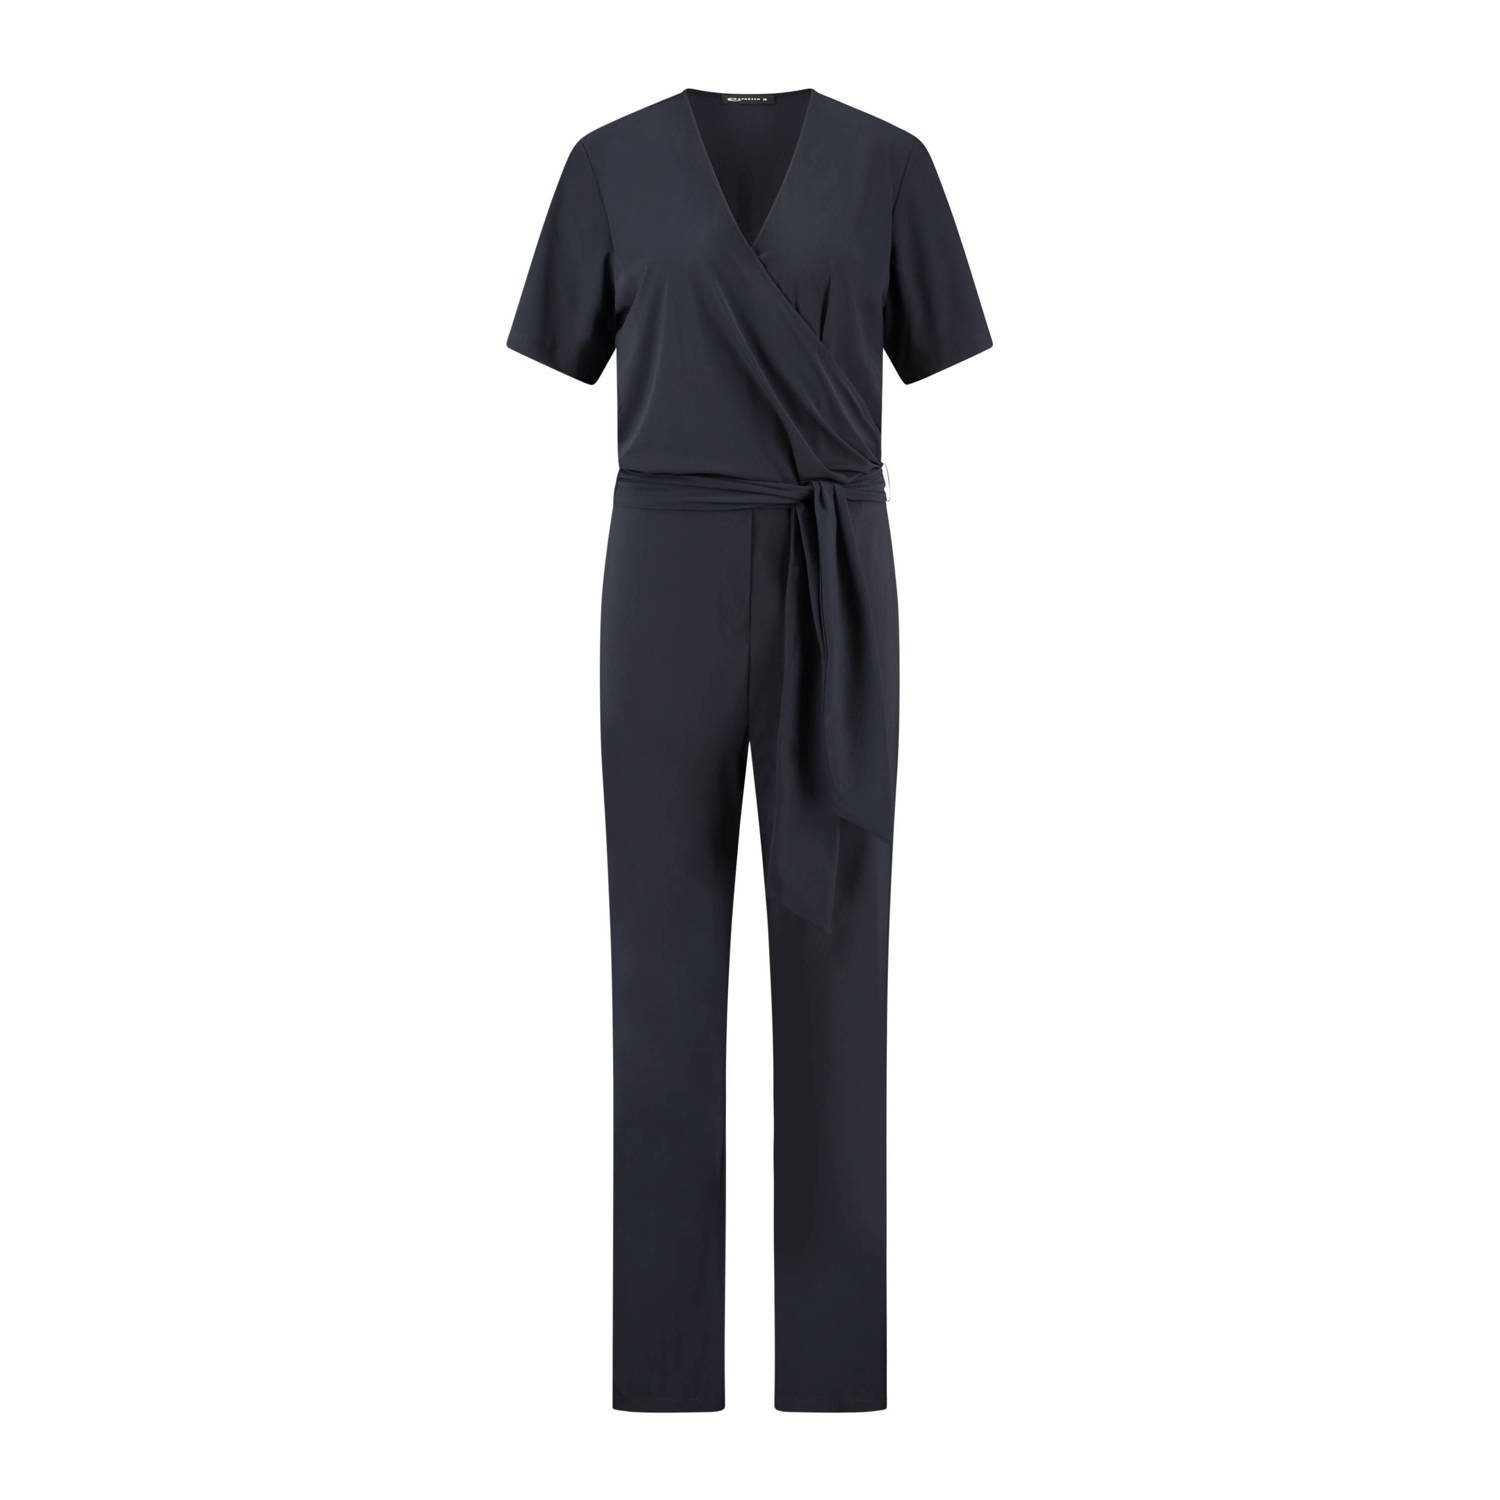 Expresso jumpsuit donkerblauw